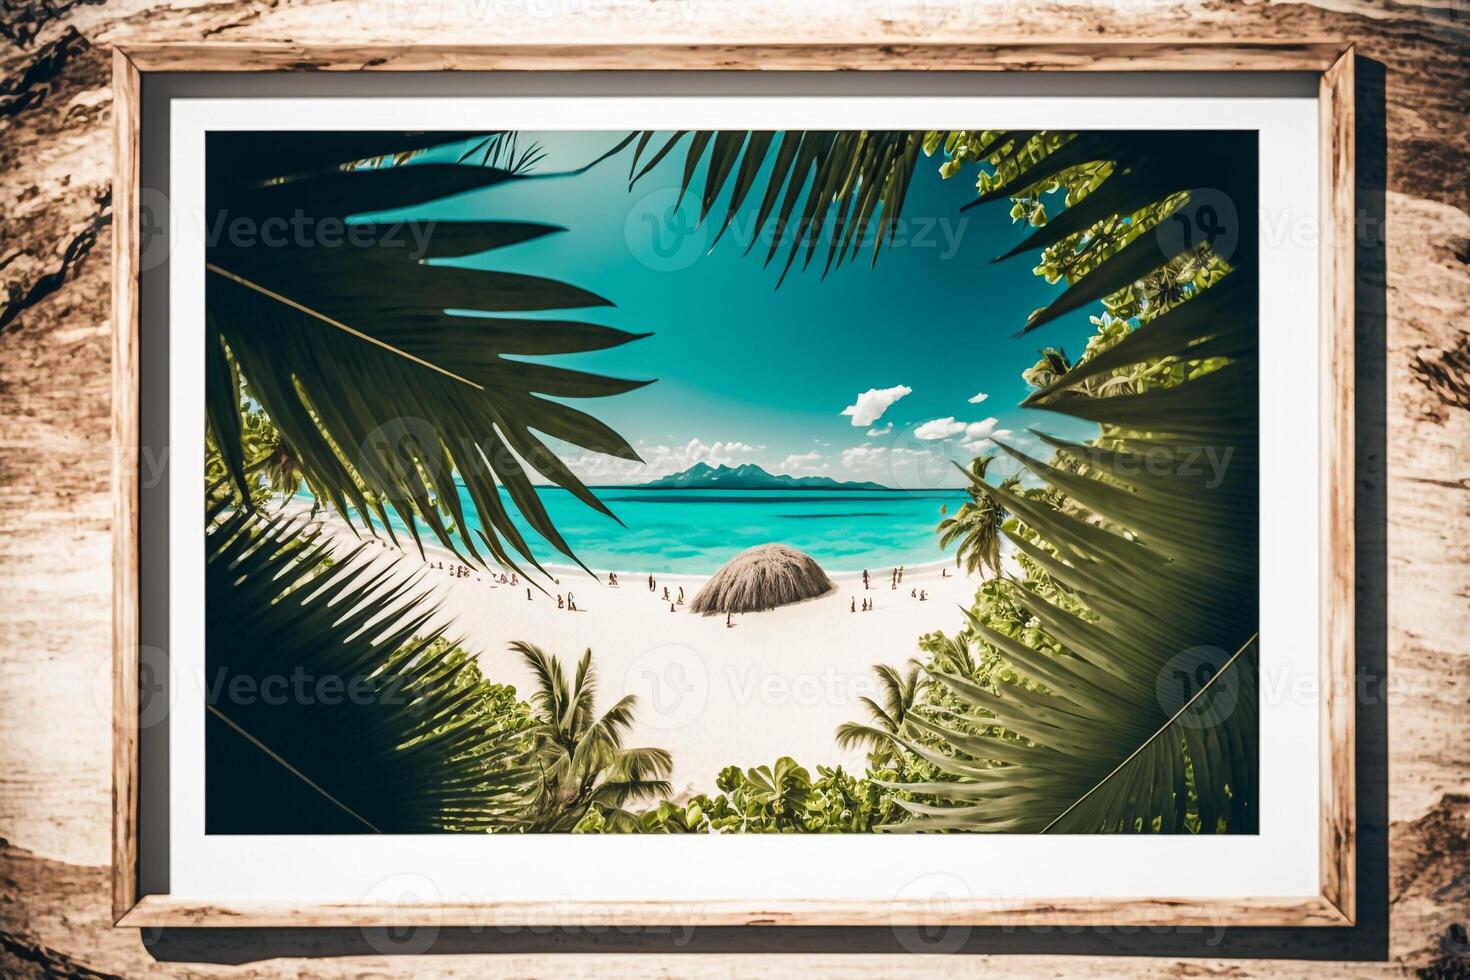 tropical beach with blue water and palm trees, mockup frame illustration photo